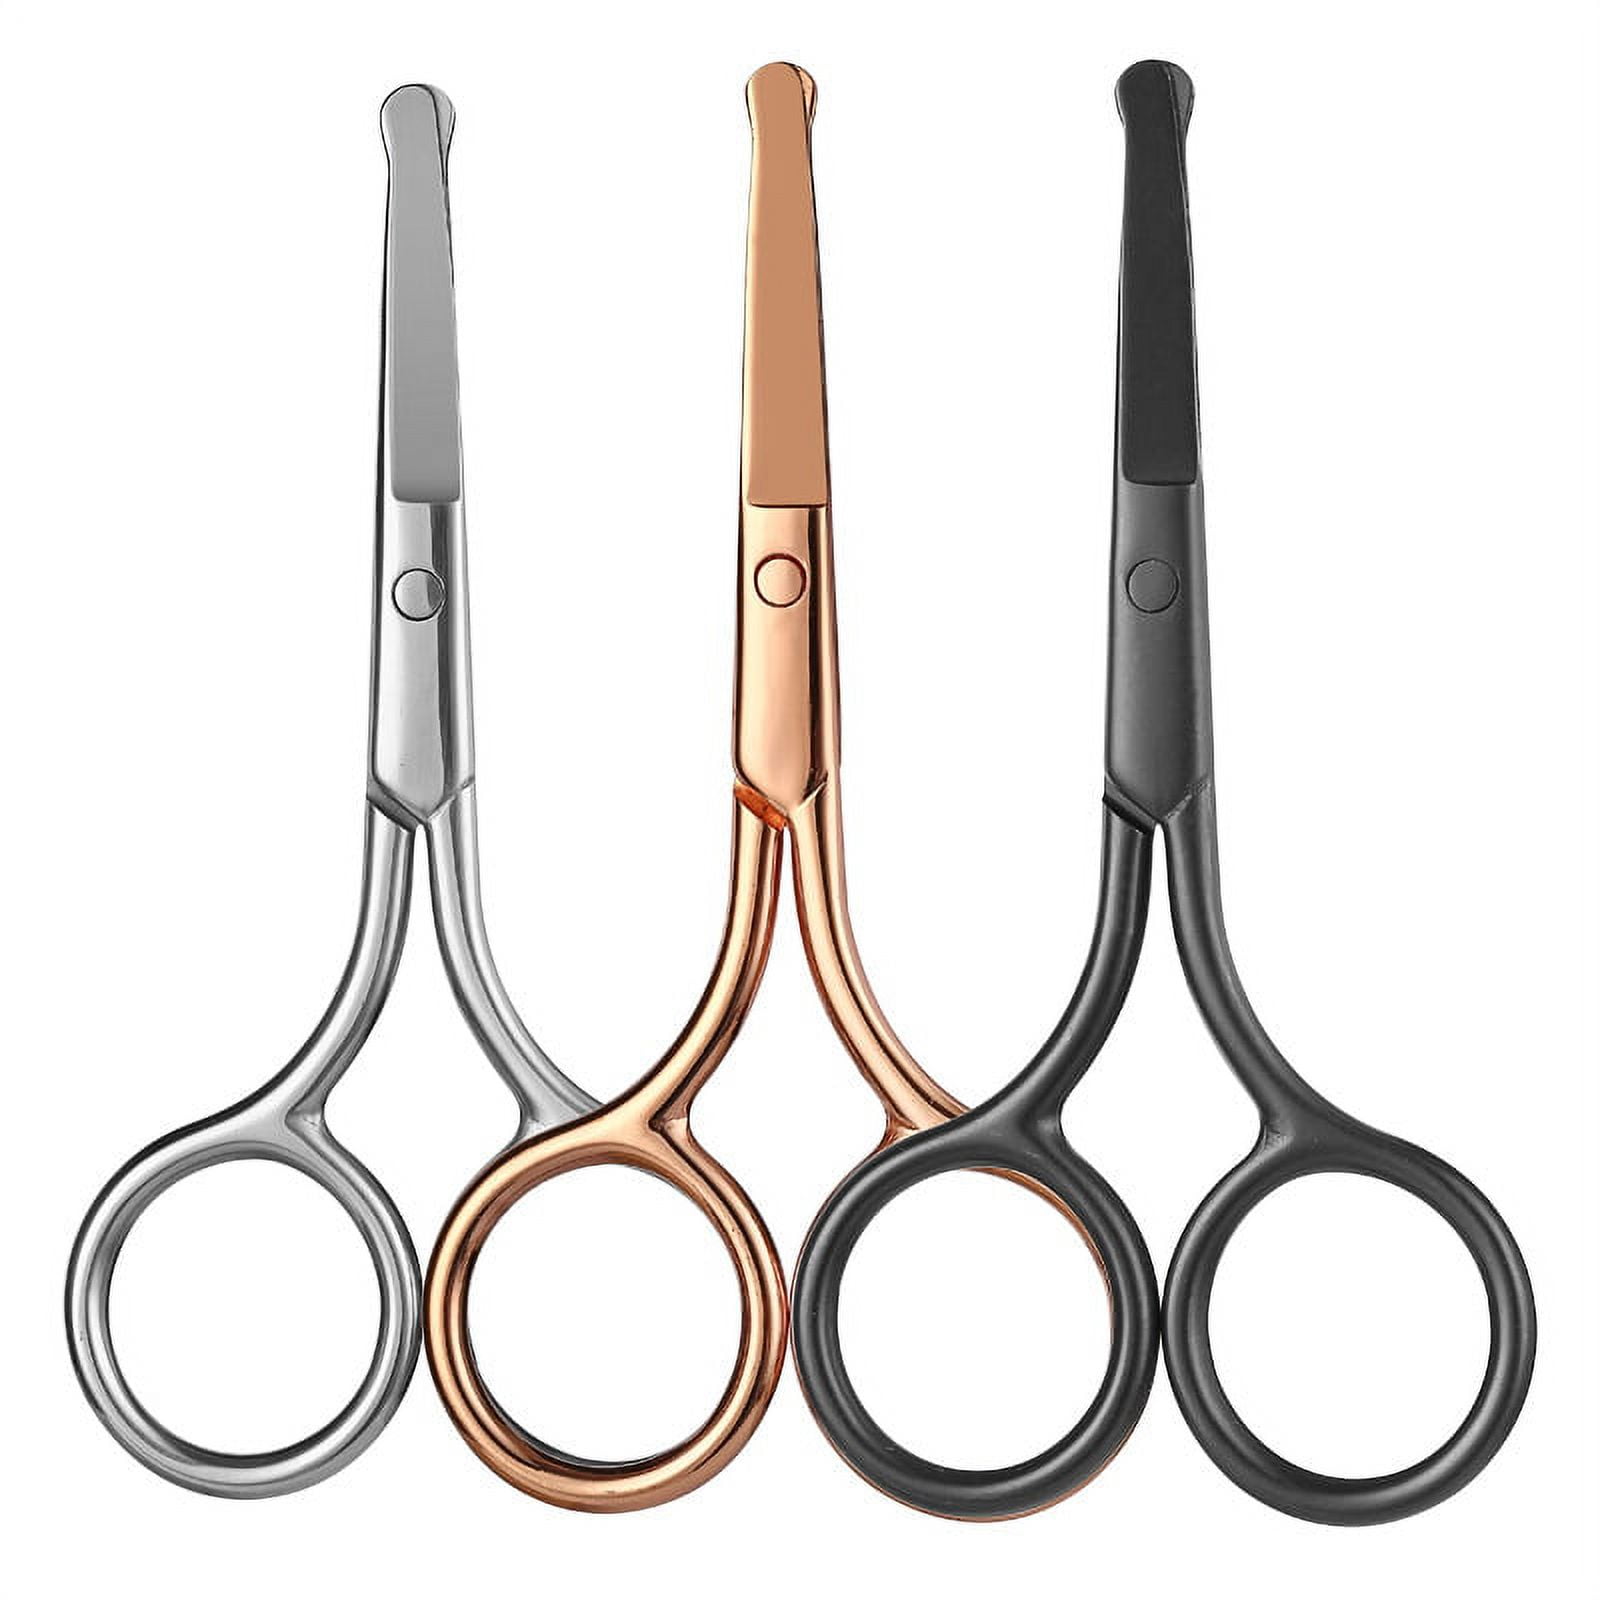 LIVINGO Professional Nose Hair Scissors, Multi-purpose Stainless Steel  Rounded Tip Straight Blade, Facial Hair Beard Eyebrows Ear Trimming Beauty